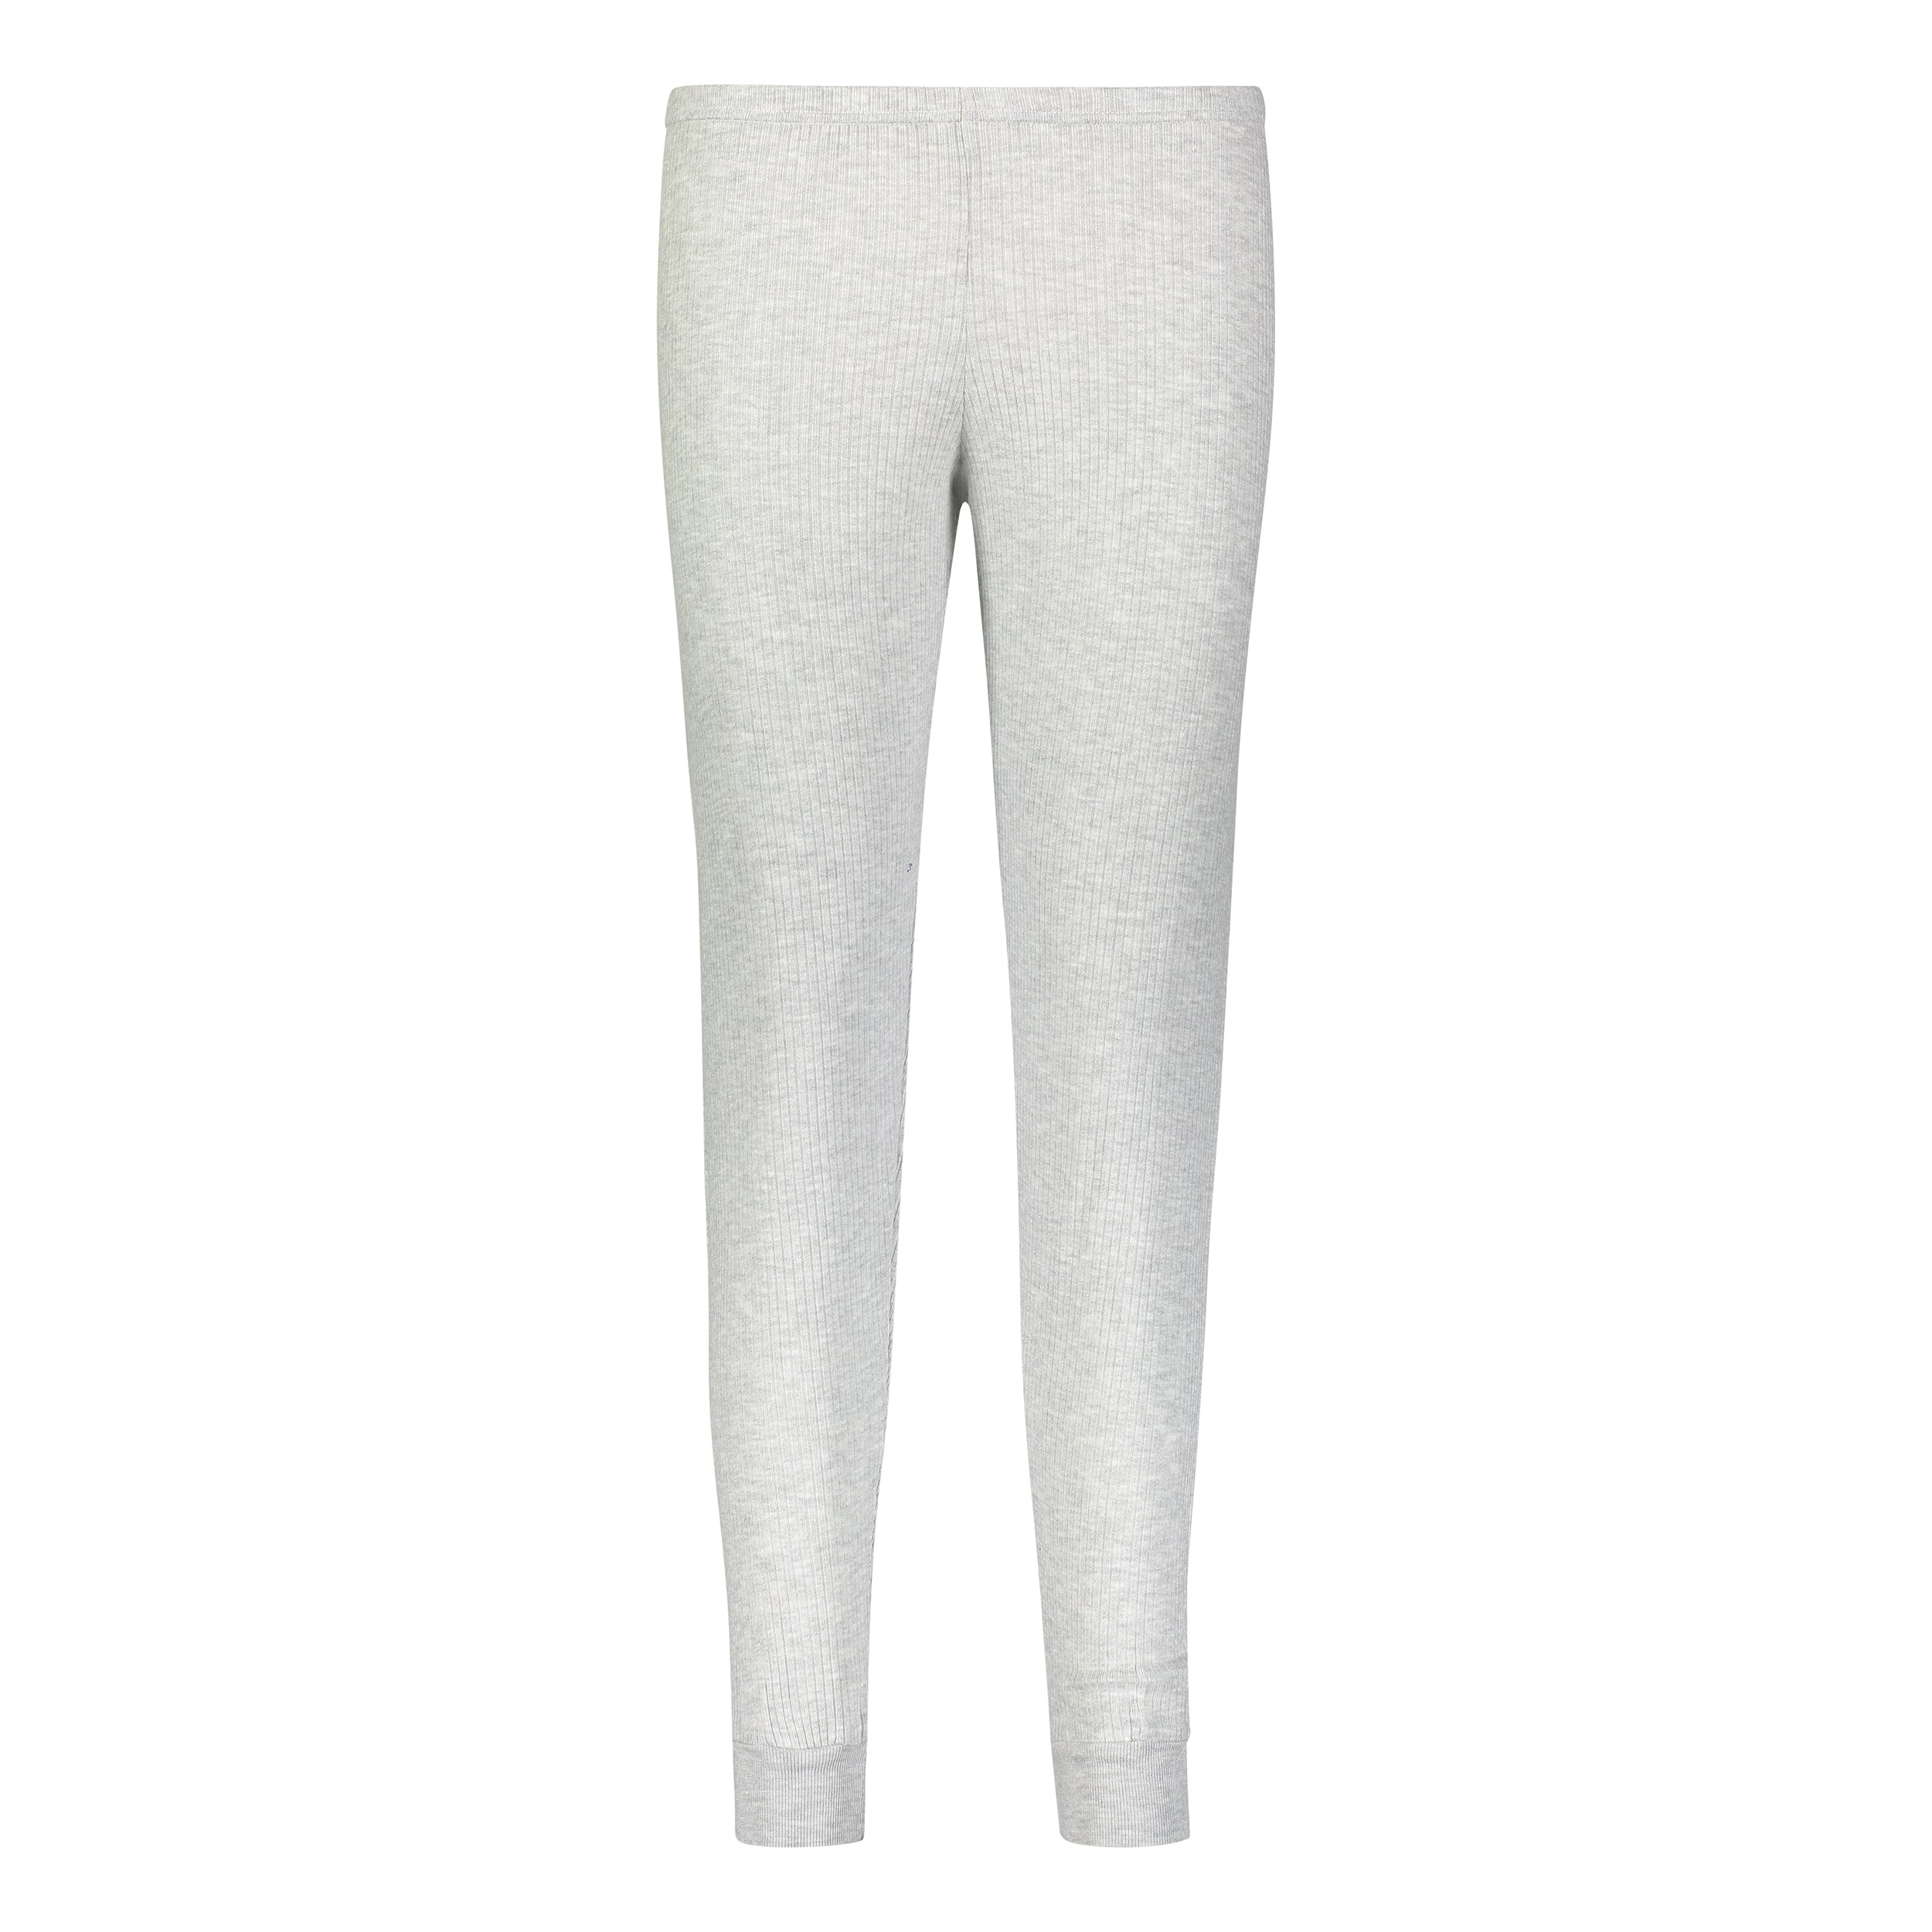 JOGGER Orig Fit MID RISE Heather Grey Solid Knit